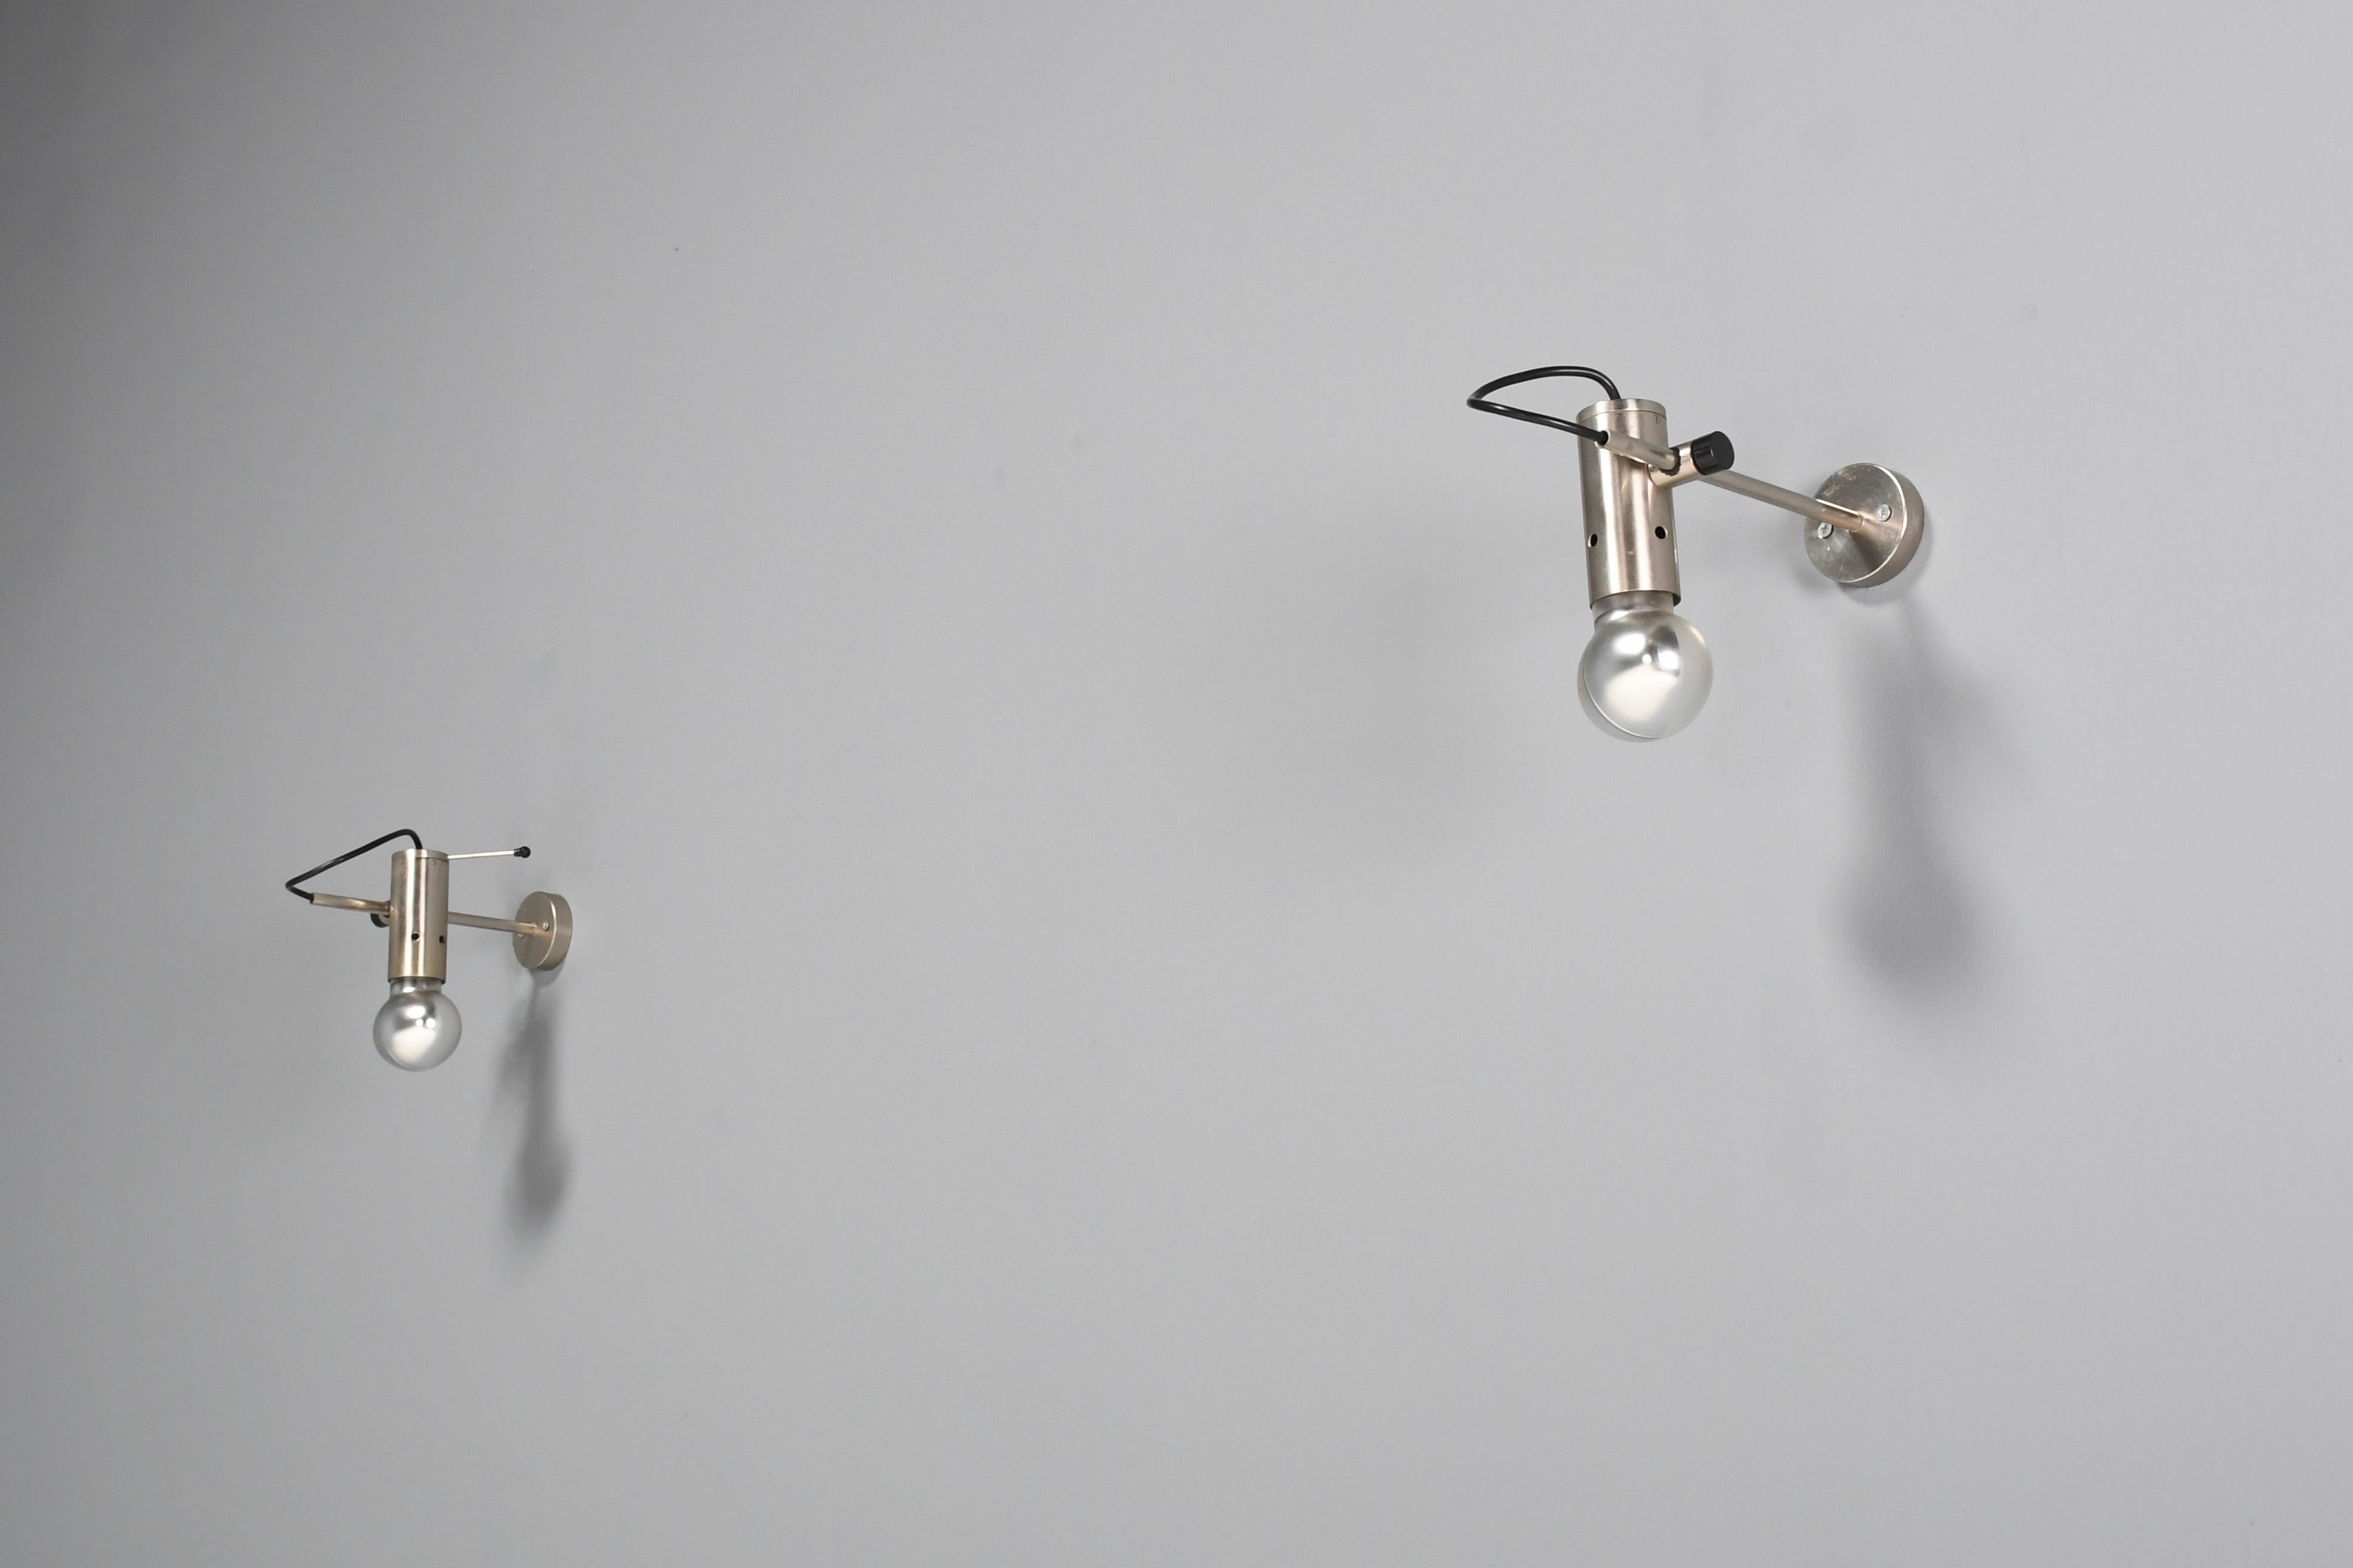 Original set of ‘Mod. 251’ sconces in very good condition.

Designed by Tito Agnoli in the 1960s

Produced by Oluce, Italy

The sconces are made from nickel plated brass with rubber details.

The lamp holder can be moved away and towards the wall by